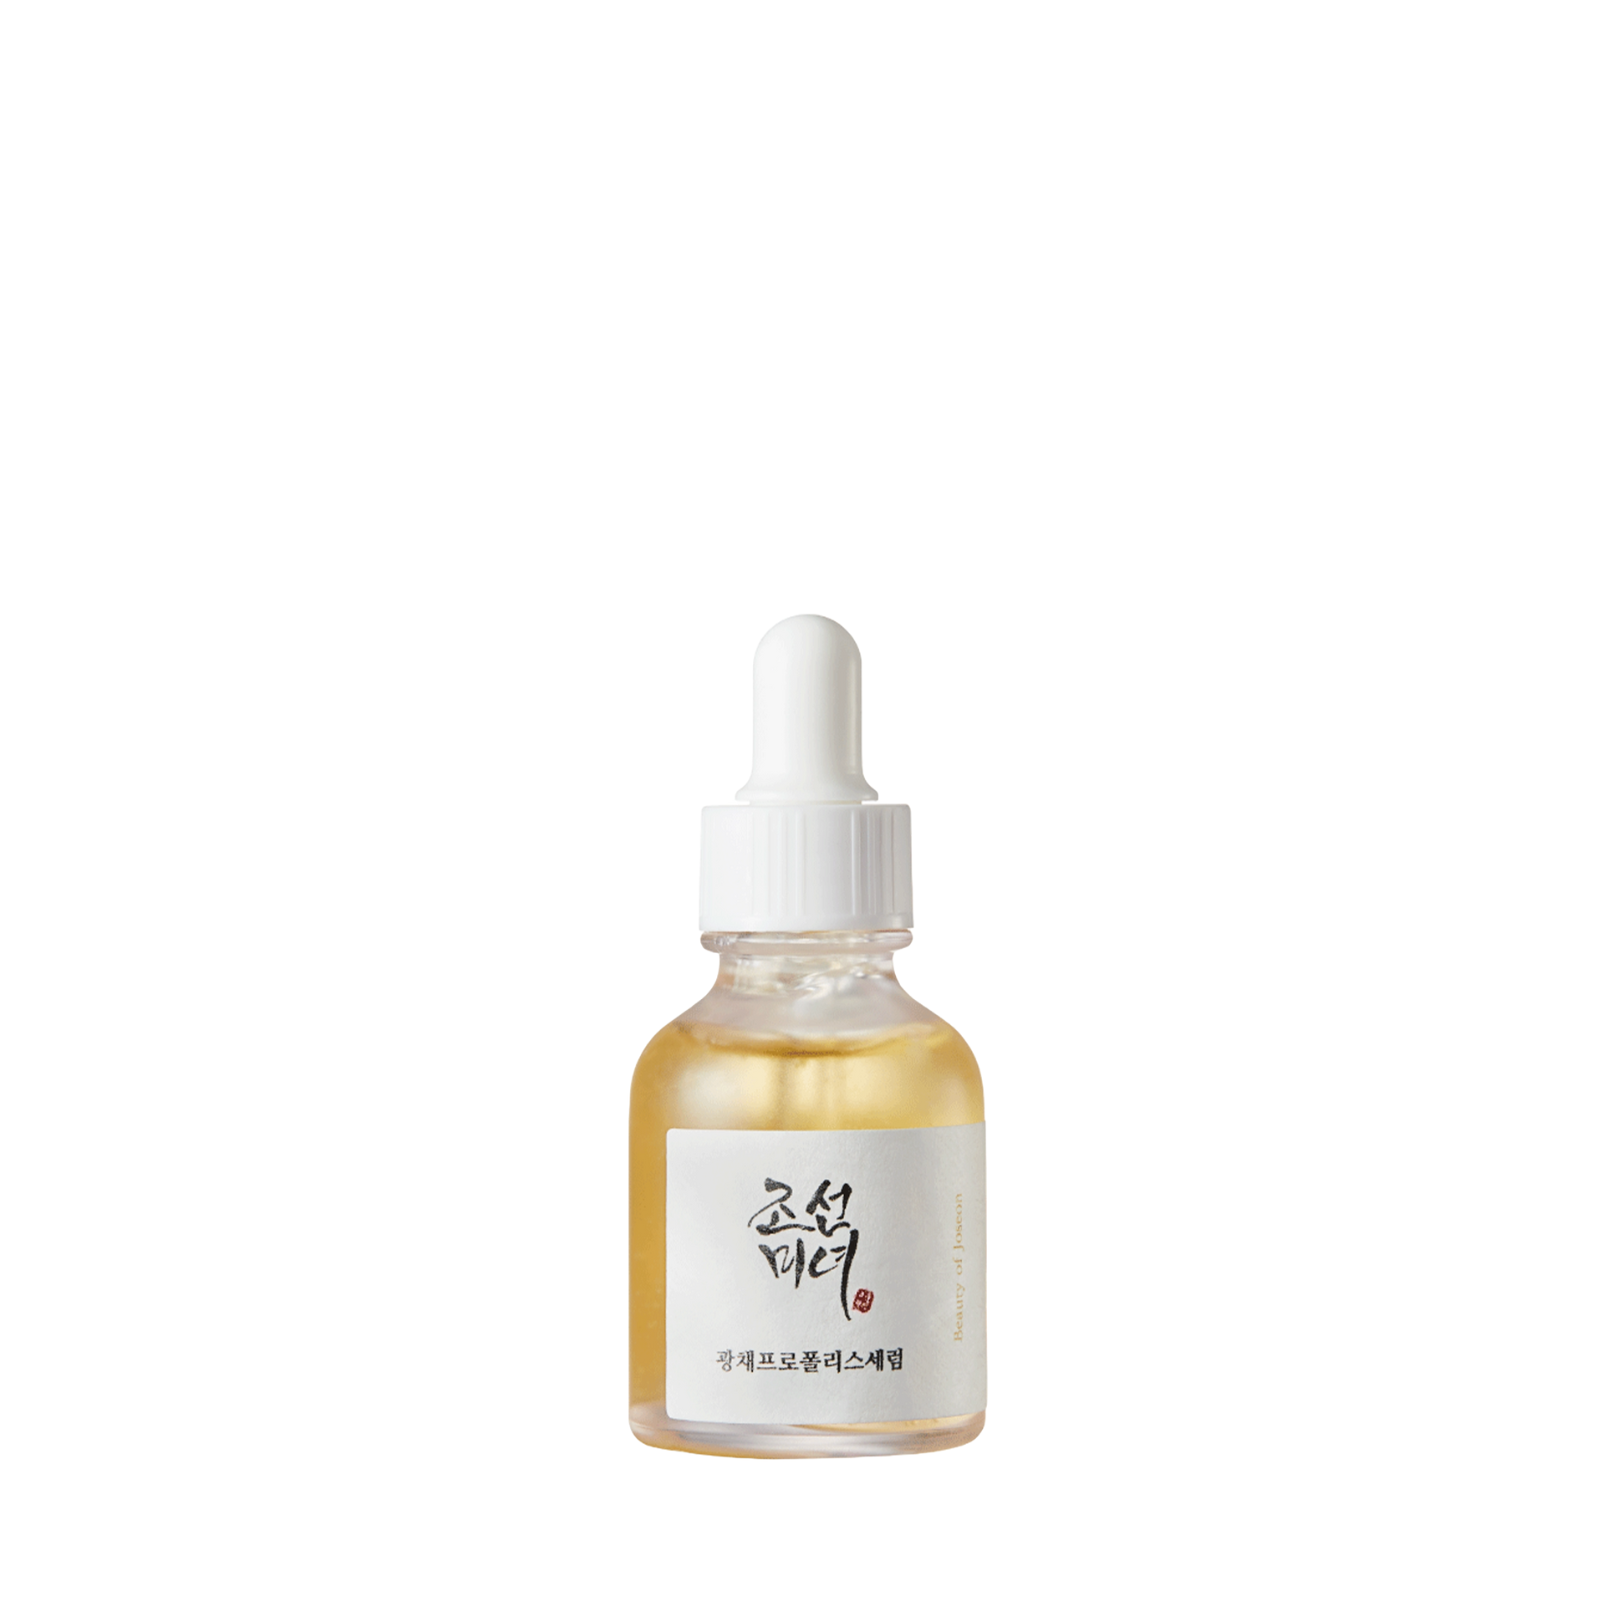 Serum with propolis and niacinamide by Beauty Of Joseon (Beauty Of Joseon Glow Serum Propolis and Niacinamide)